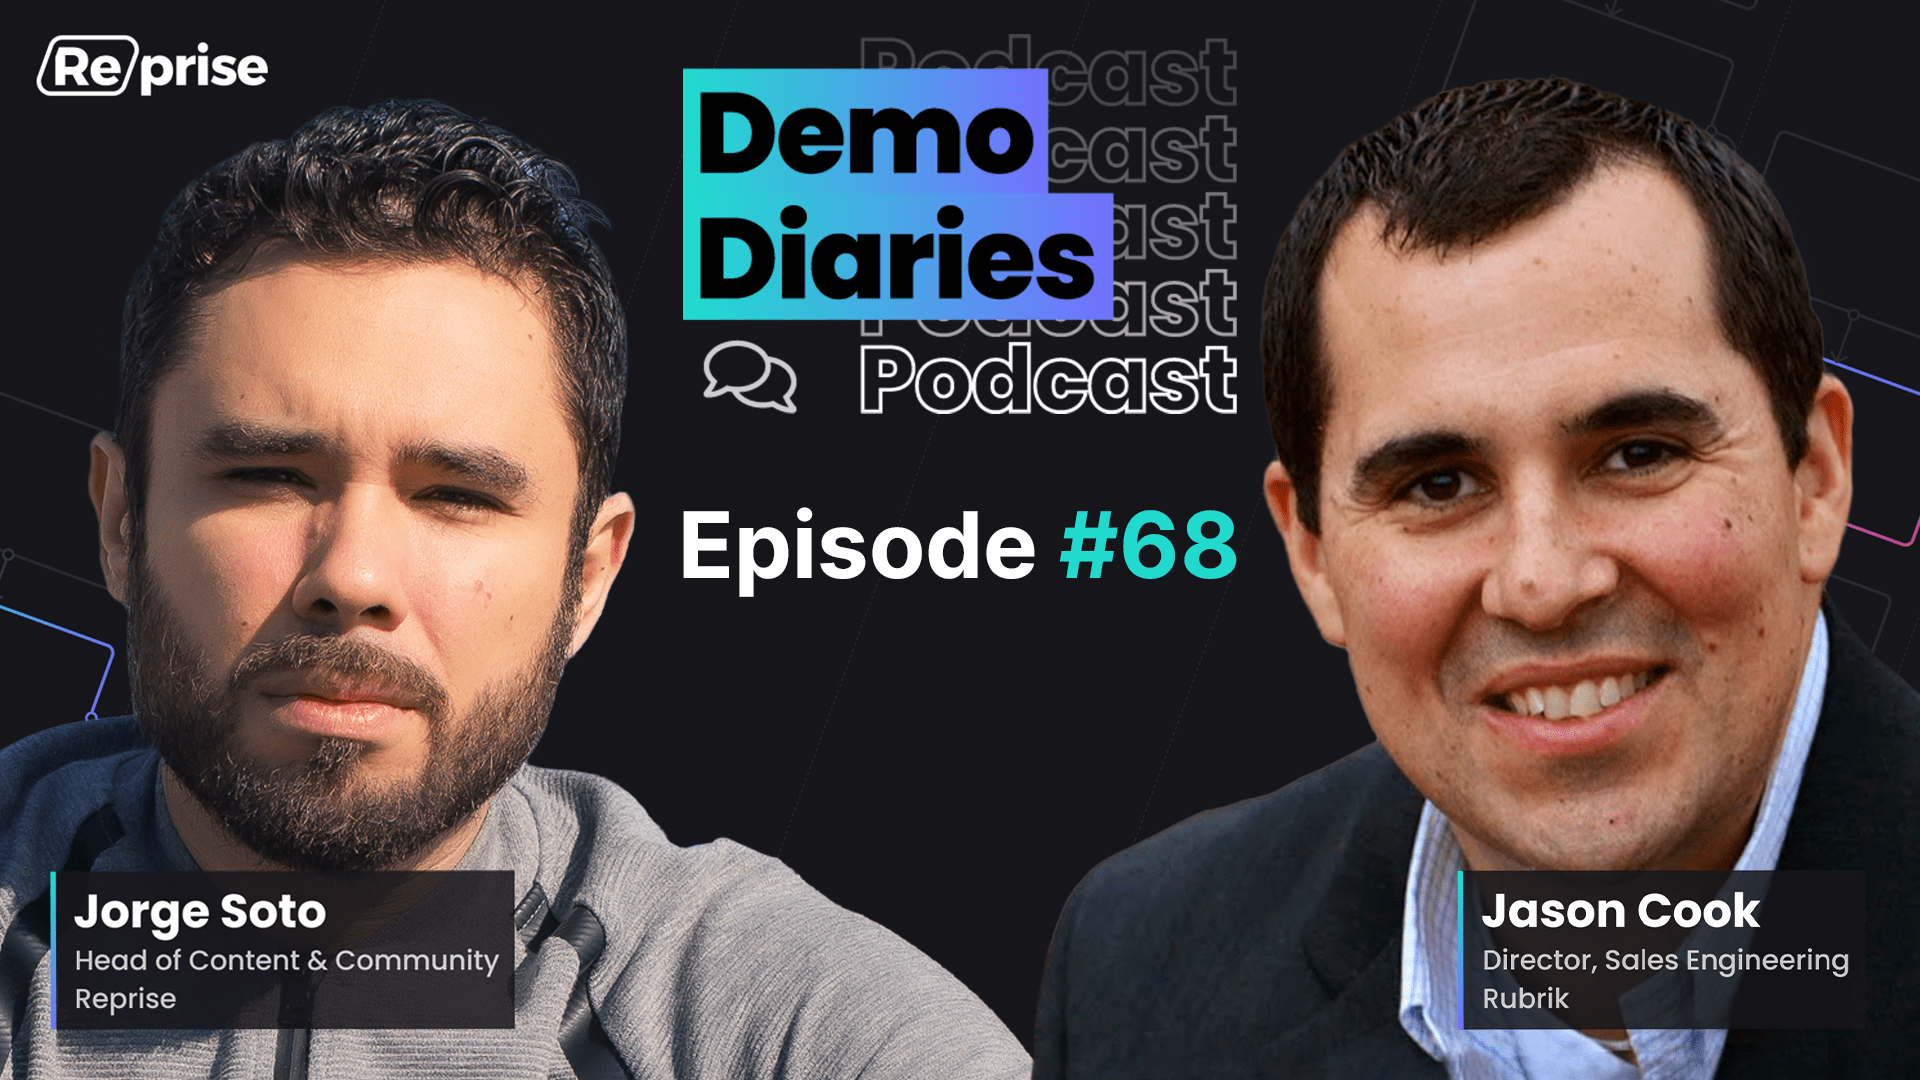 Demo Diaries: Ep 068 | “Reimagining Sales Through Vision, Value, and Outcome”